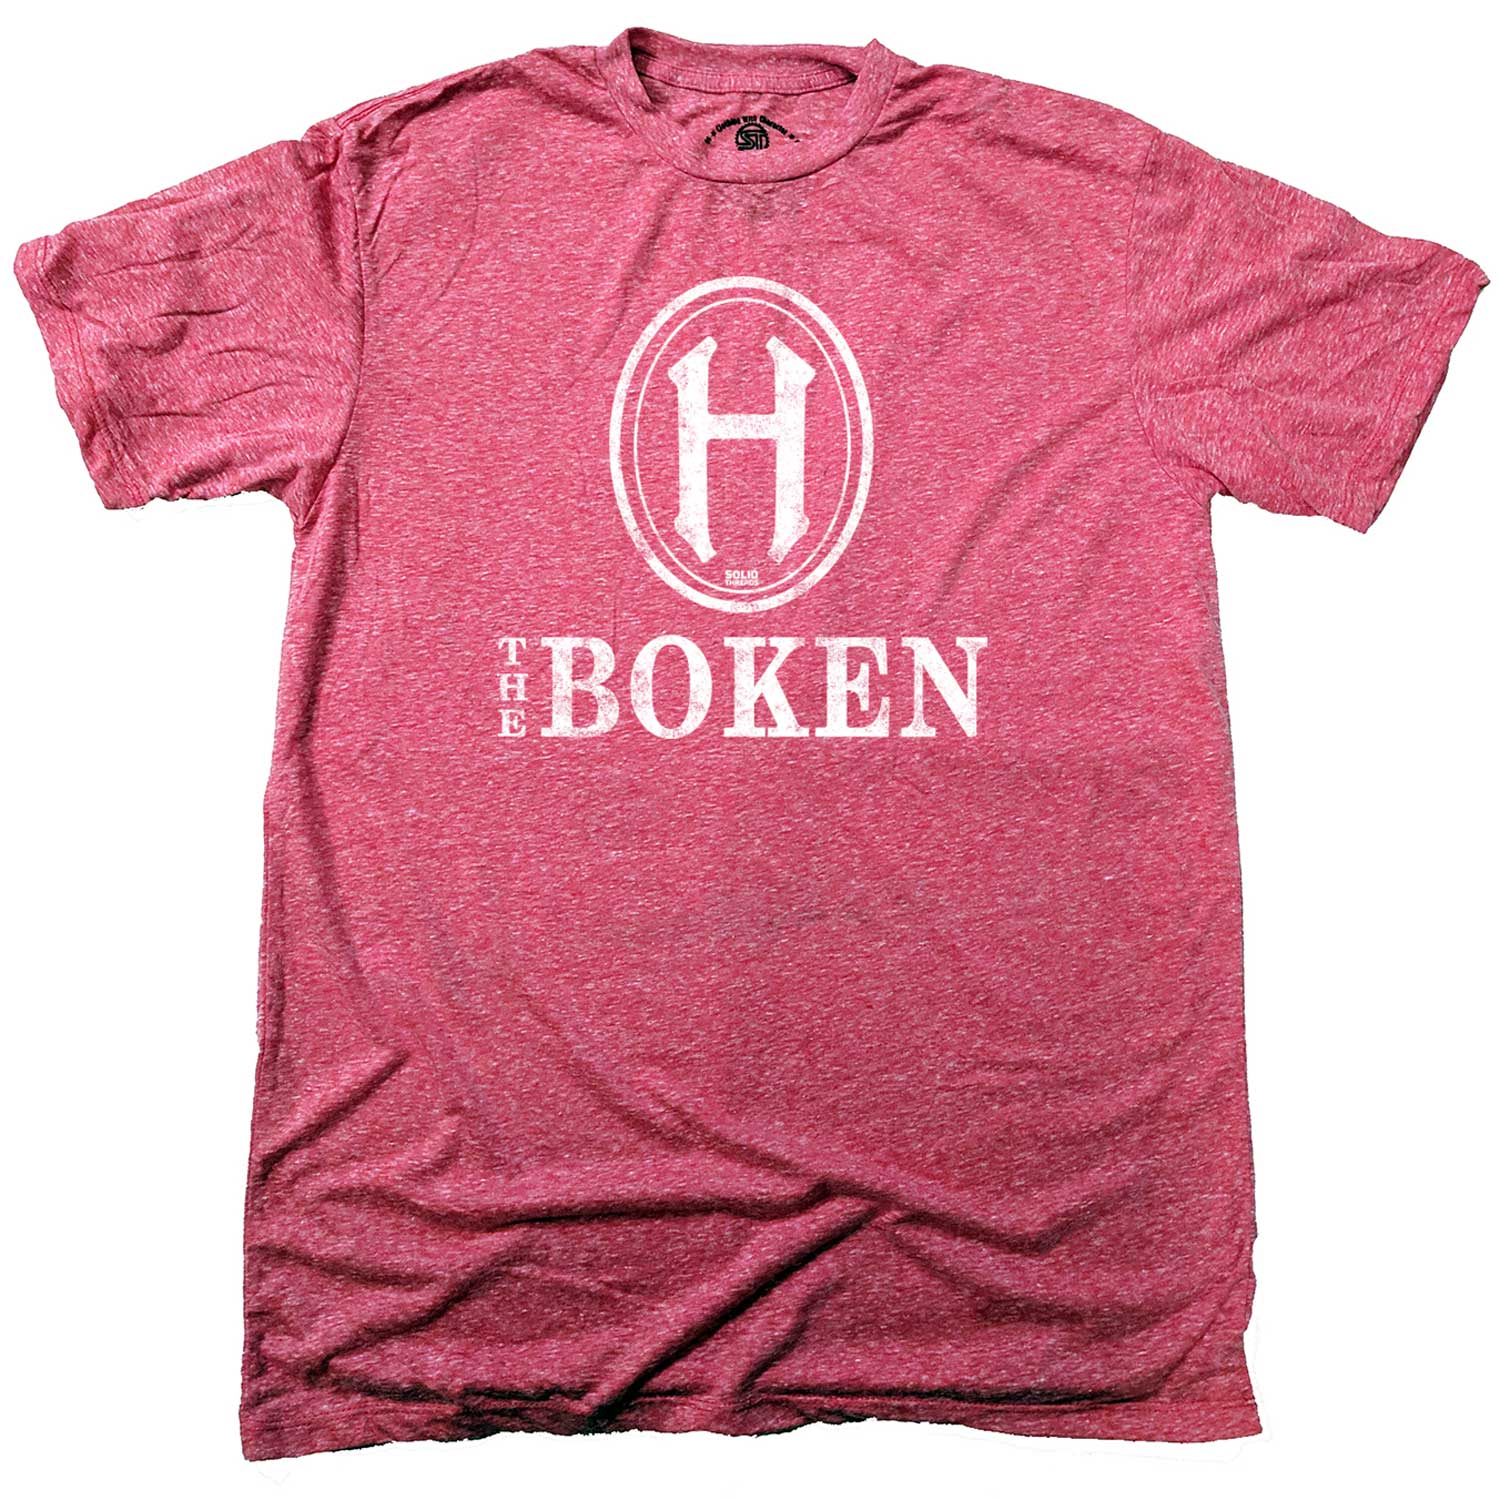 The Boken Vintage T-shirt | SOLID THREADS